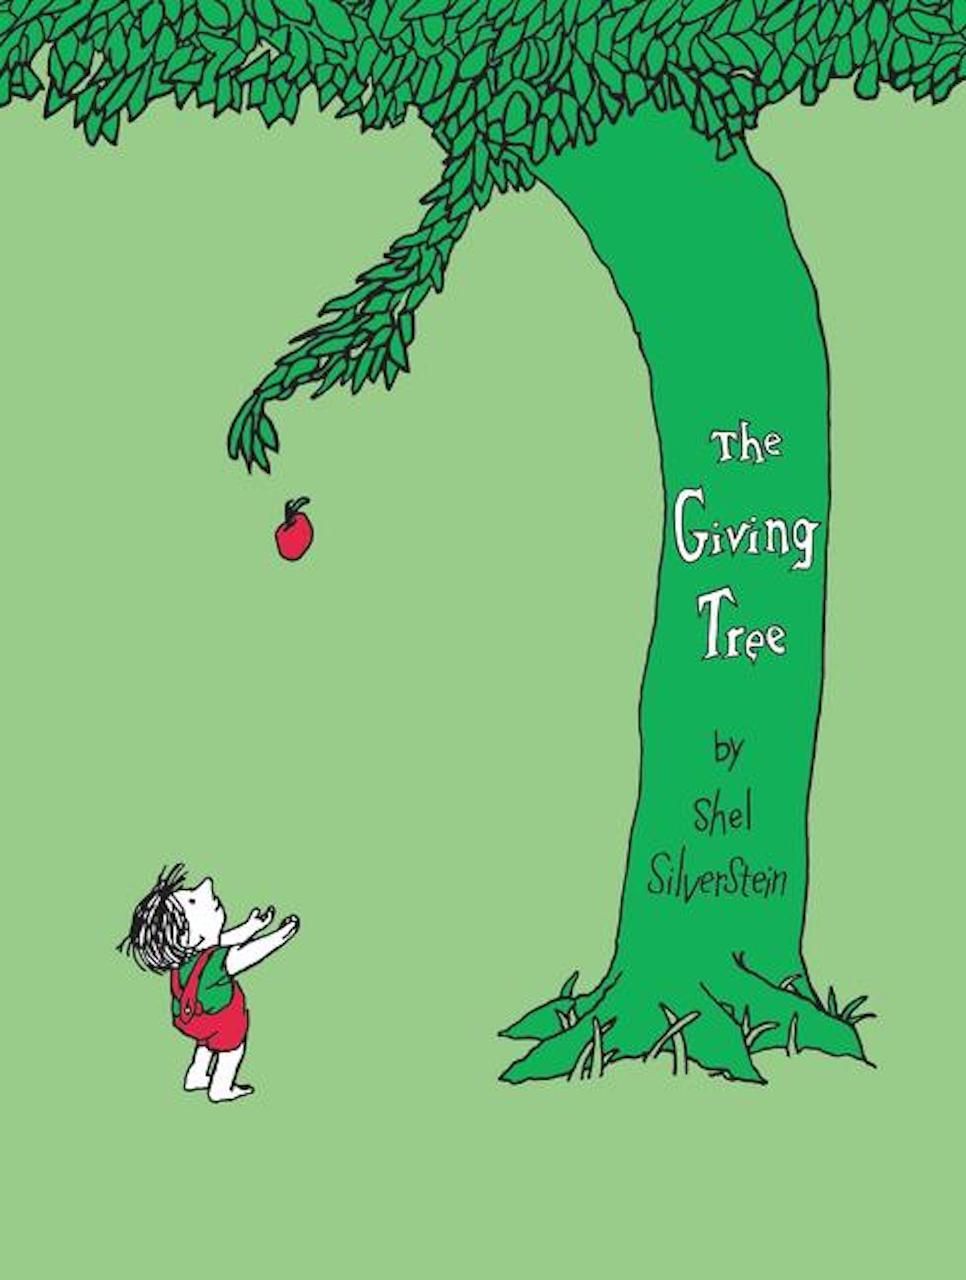 The Giving Tree book